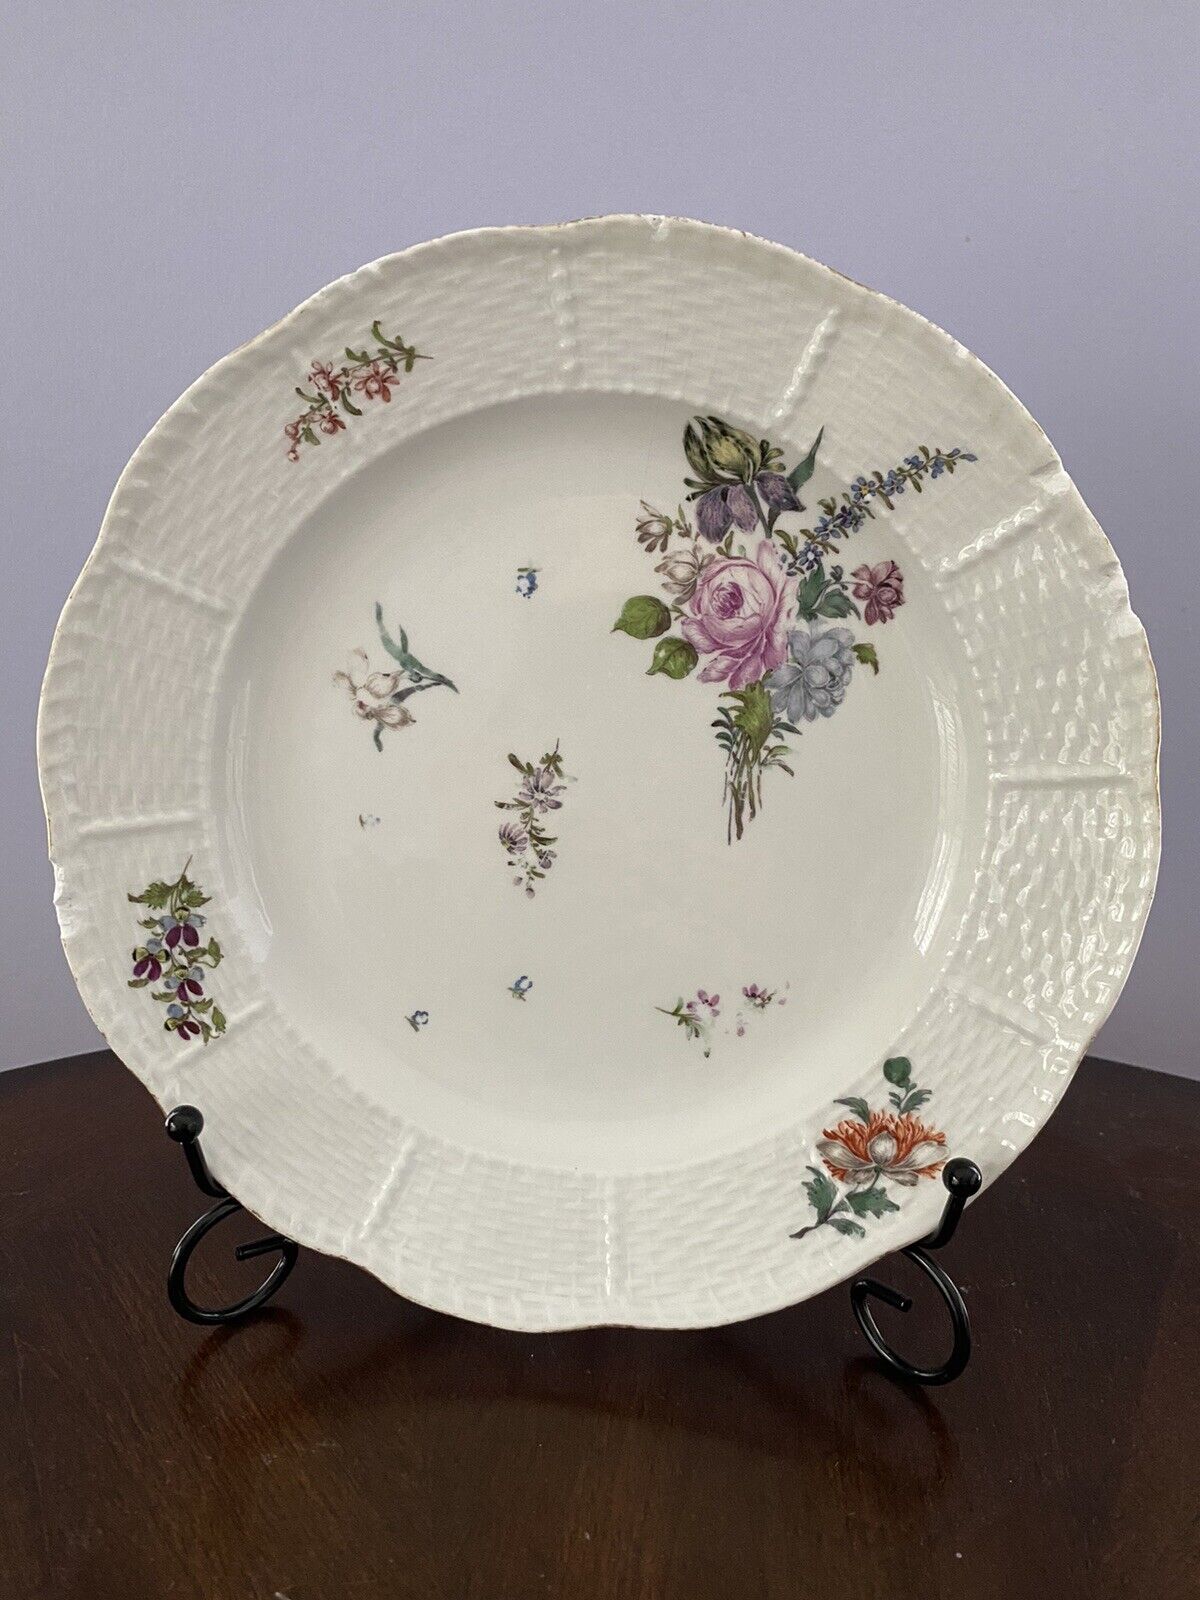 Antique Meissen Hand-Painted Floral Plate, Early 18th Century